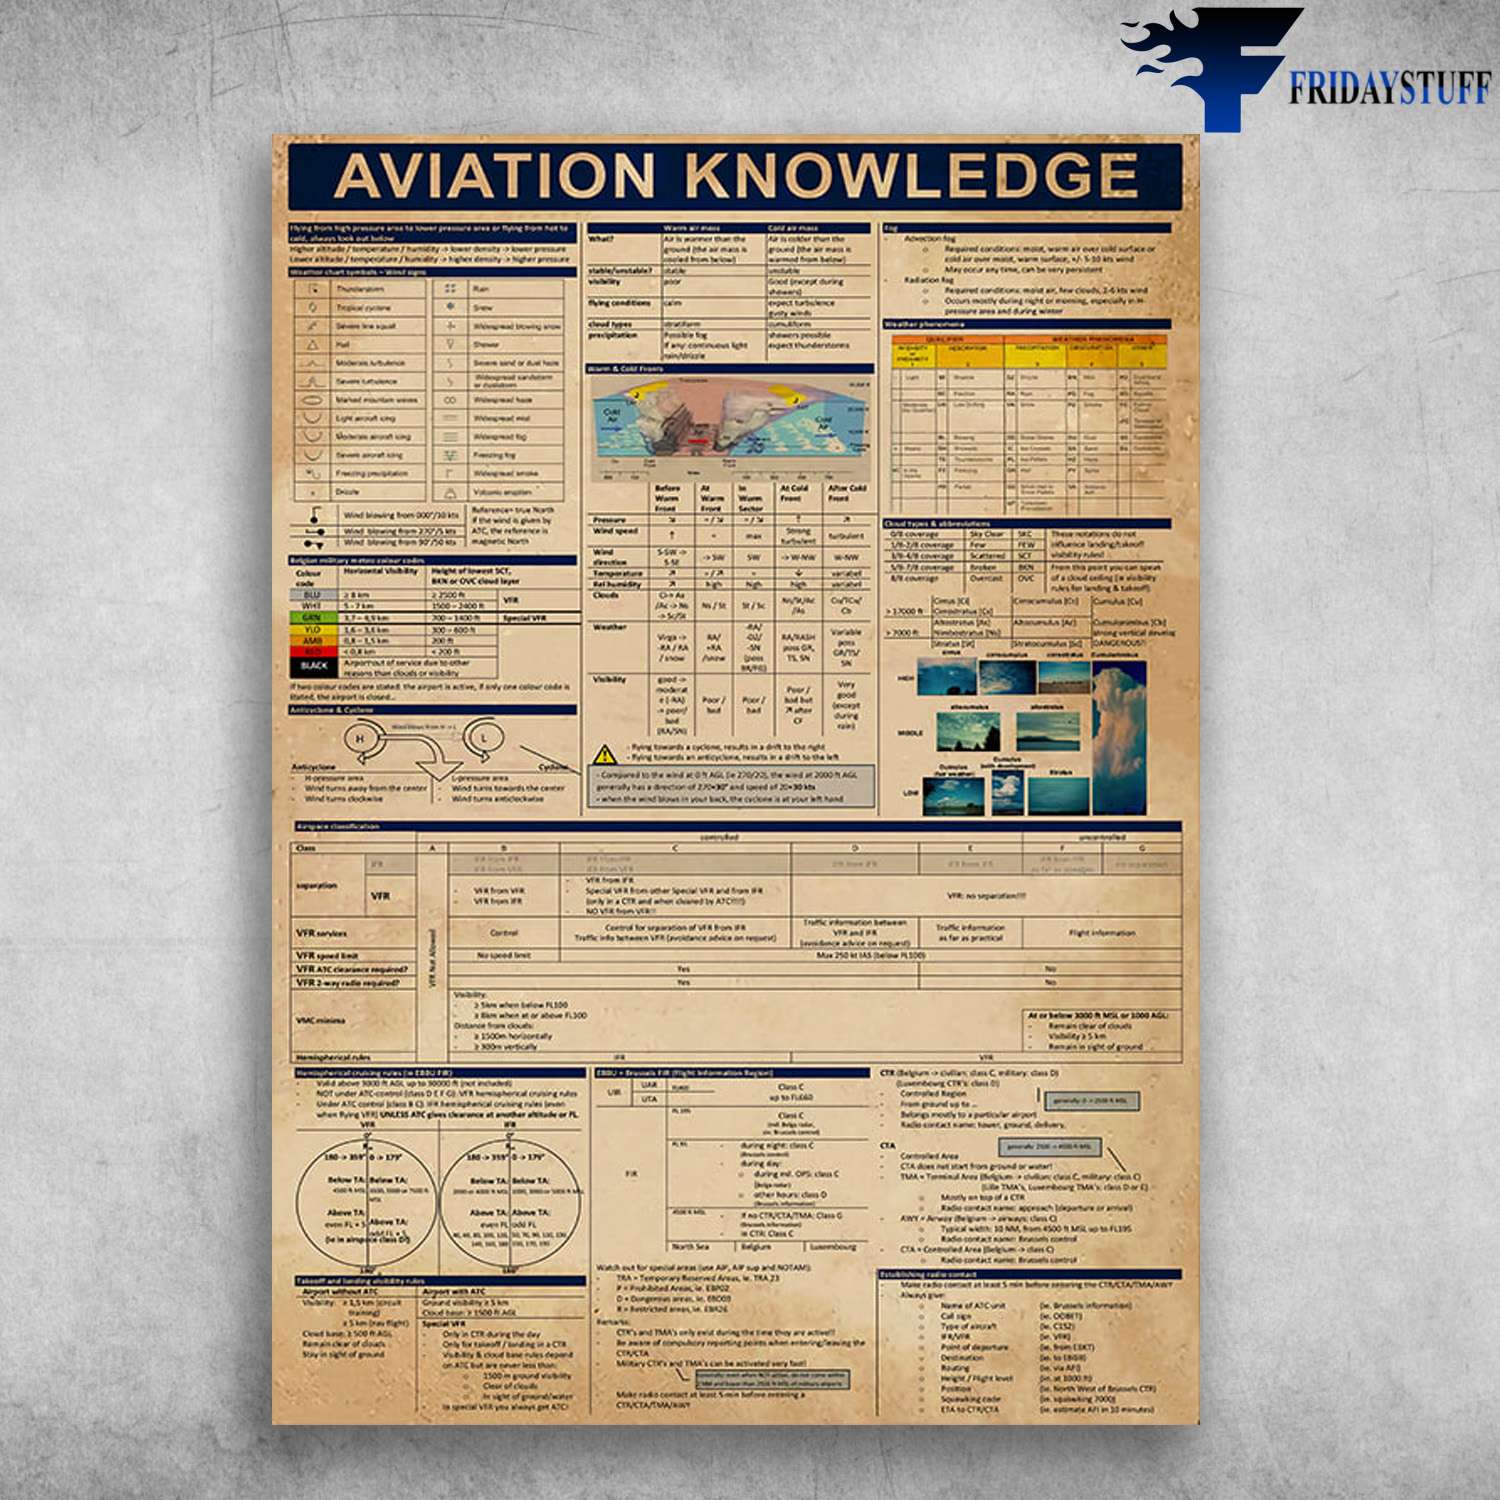 Aviation Knowledge - Knowledge About Aviation